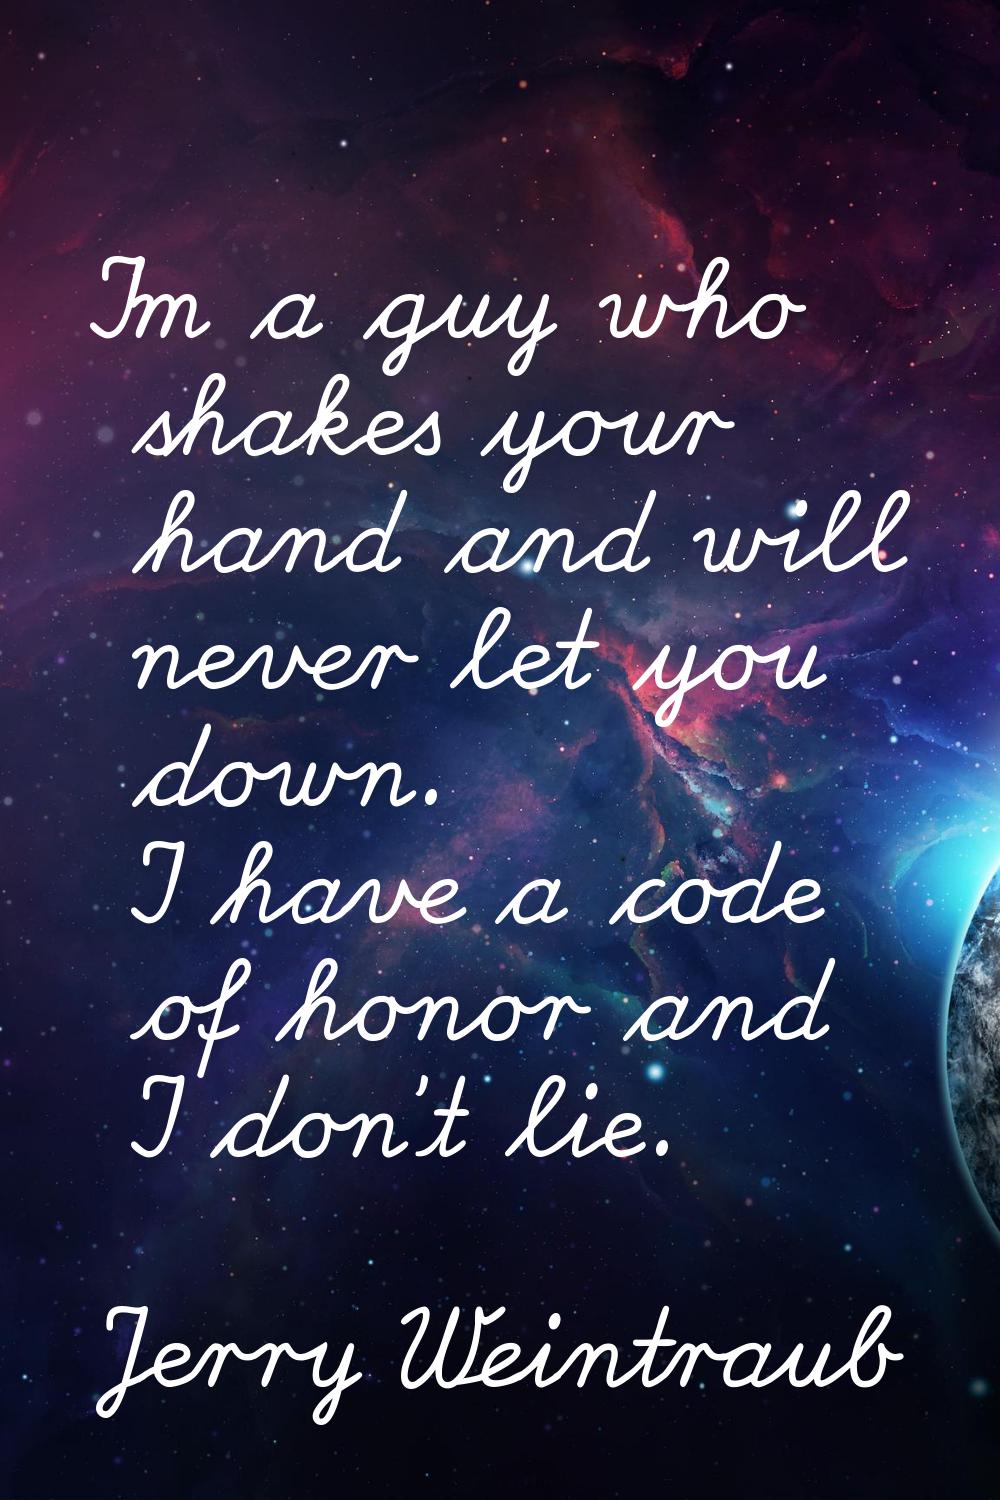 I'm a guy who shakes your hand and will never let you down. I have a code of honor and I don't lie.